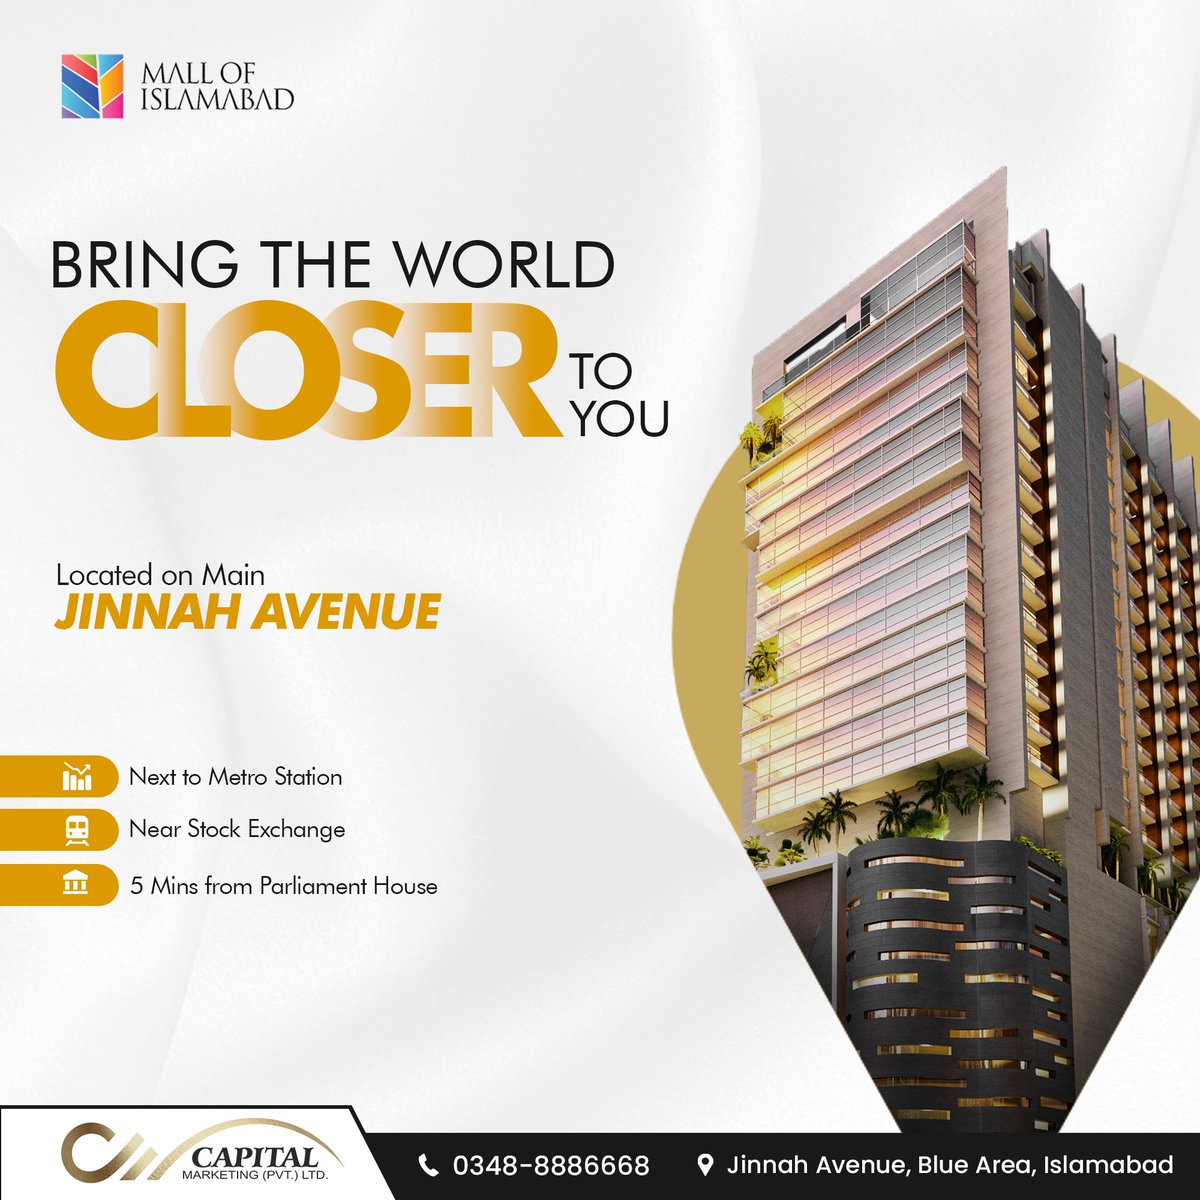 Experience the convenience of city life at the Mall of Islamabad! Located on Main Jinnah Avenue, A short walk from the metro station and the stock exchange. Plus, it's only a 5-minute drive from the Parliament House.
#MallofIslamabad #InternationalBrands #LocalBrands #location